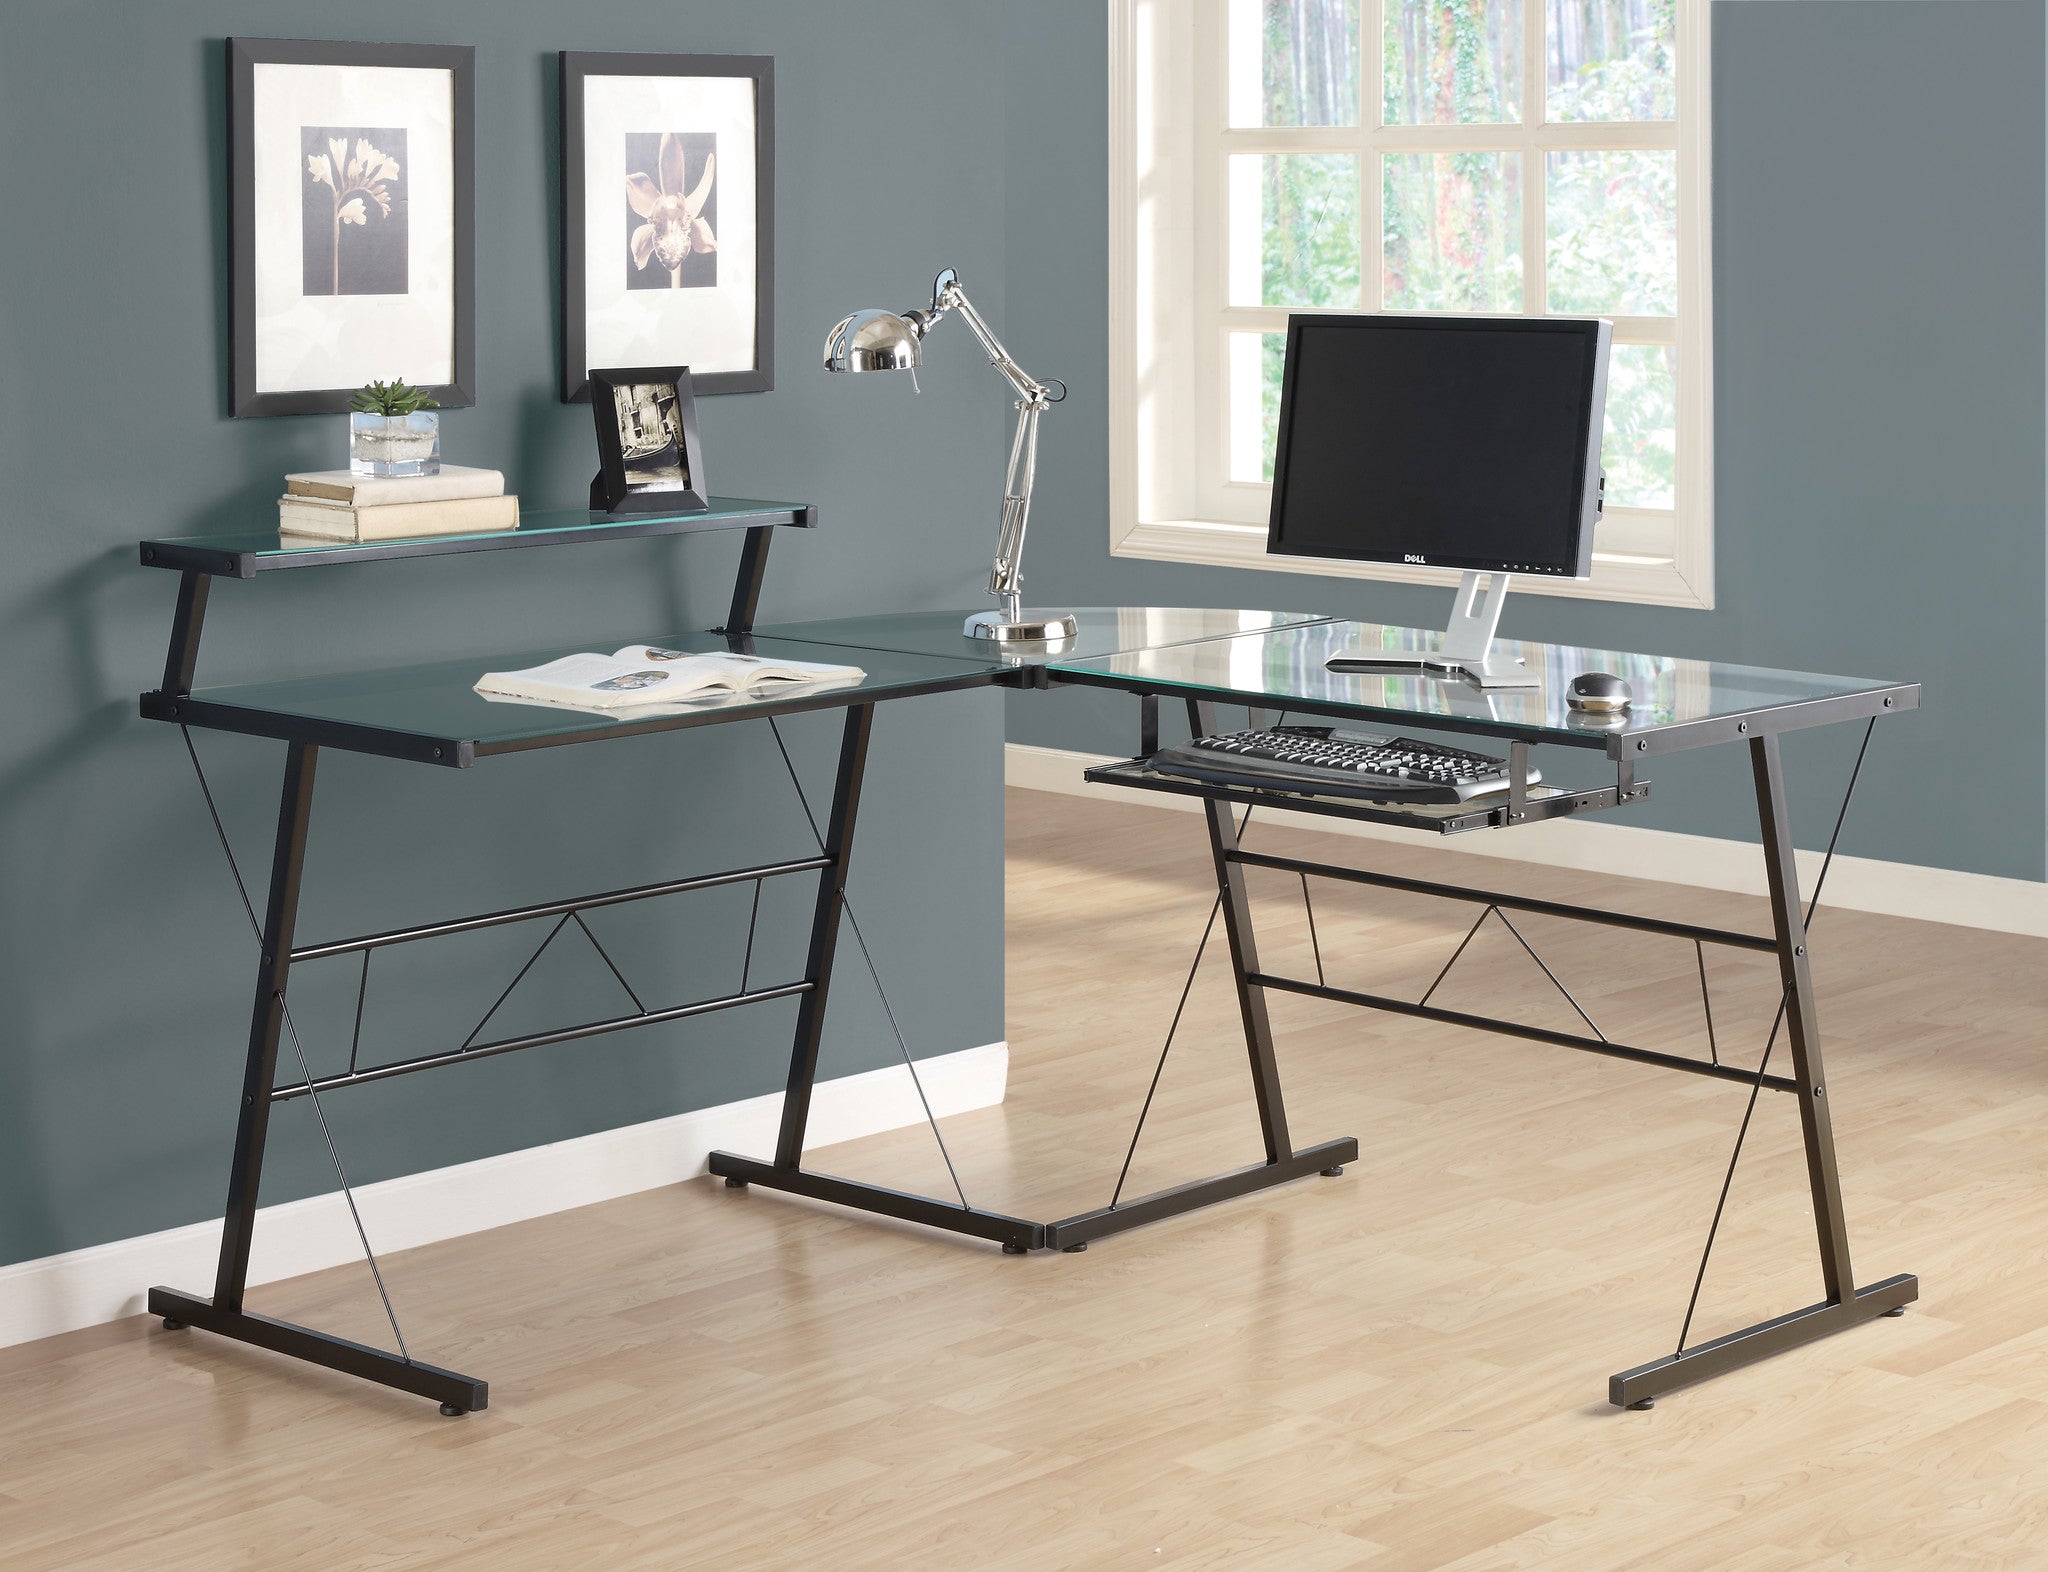 Black Metal Corner Computer Desk With Tempered Glass The Office